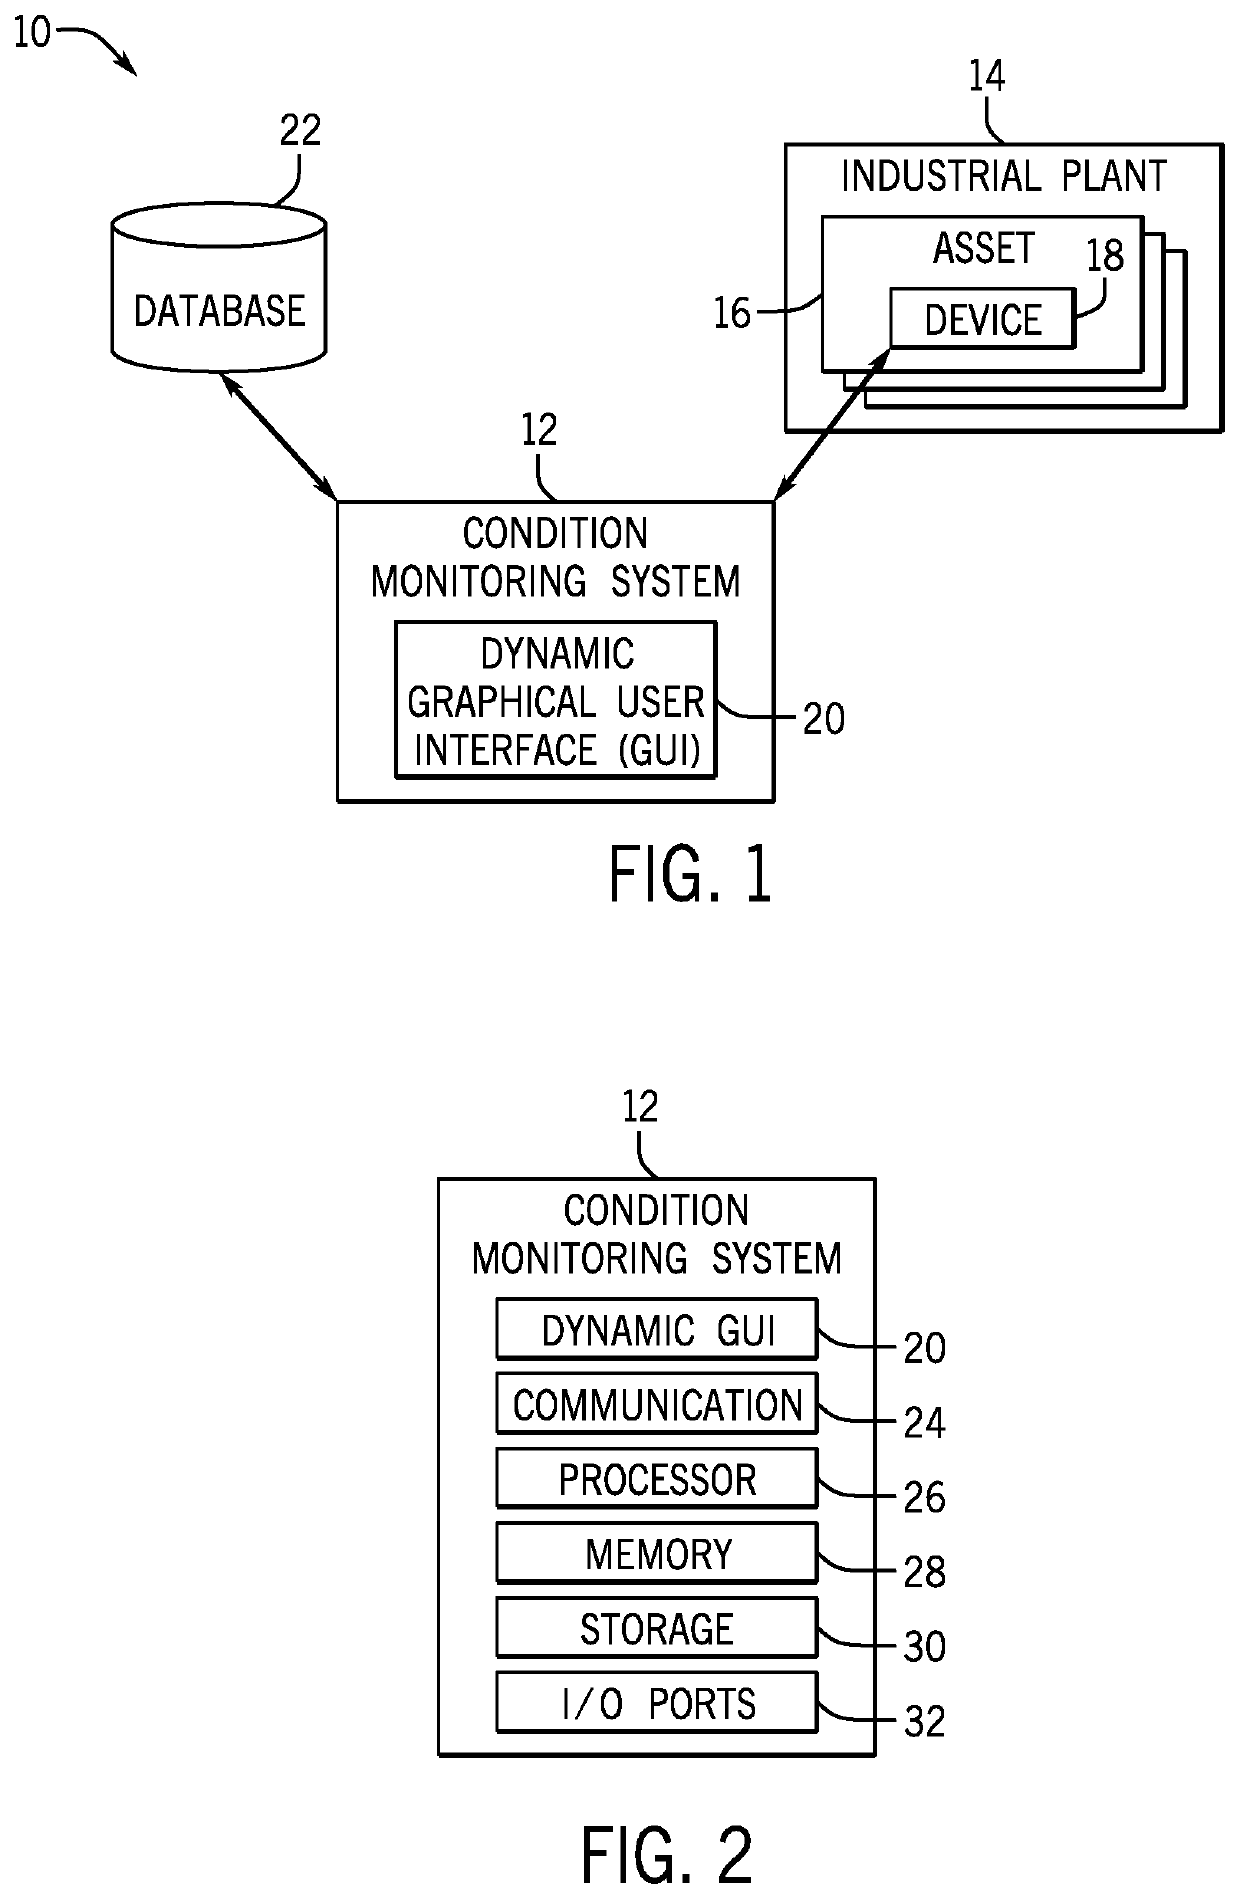 Systems and methods for prioritizing and monitoring device status in a condition monitoring software application